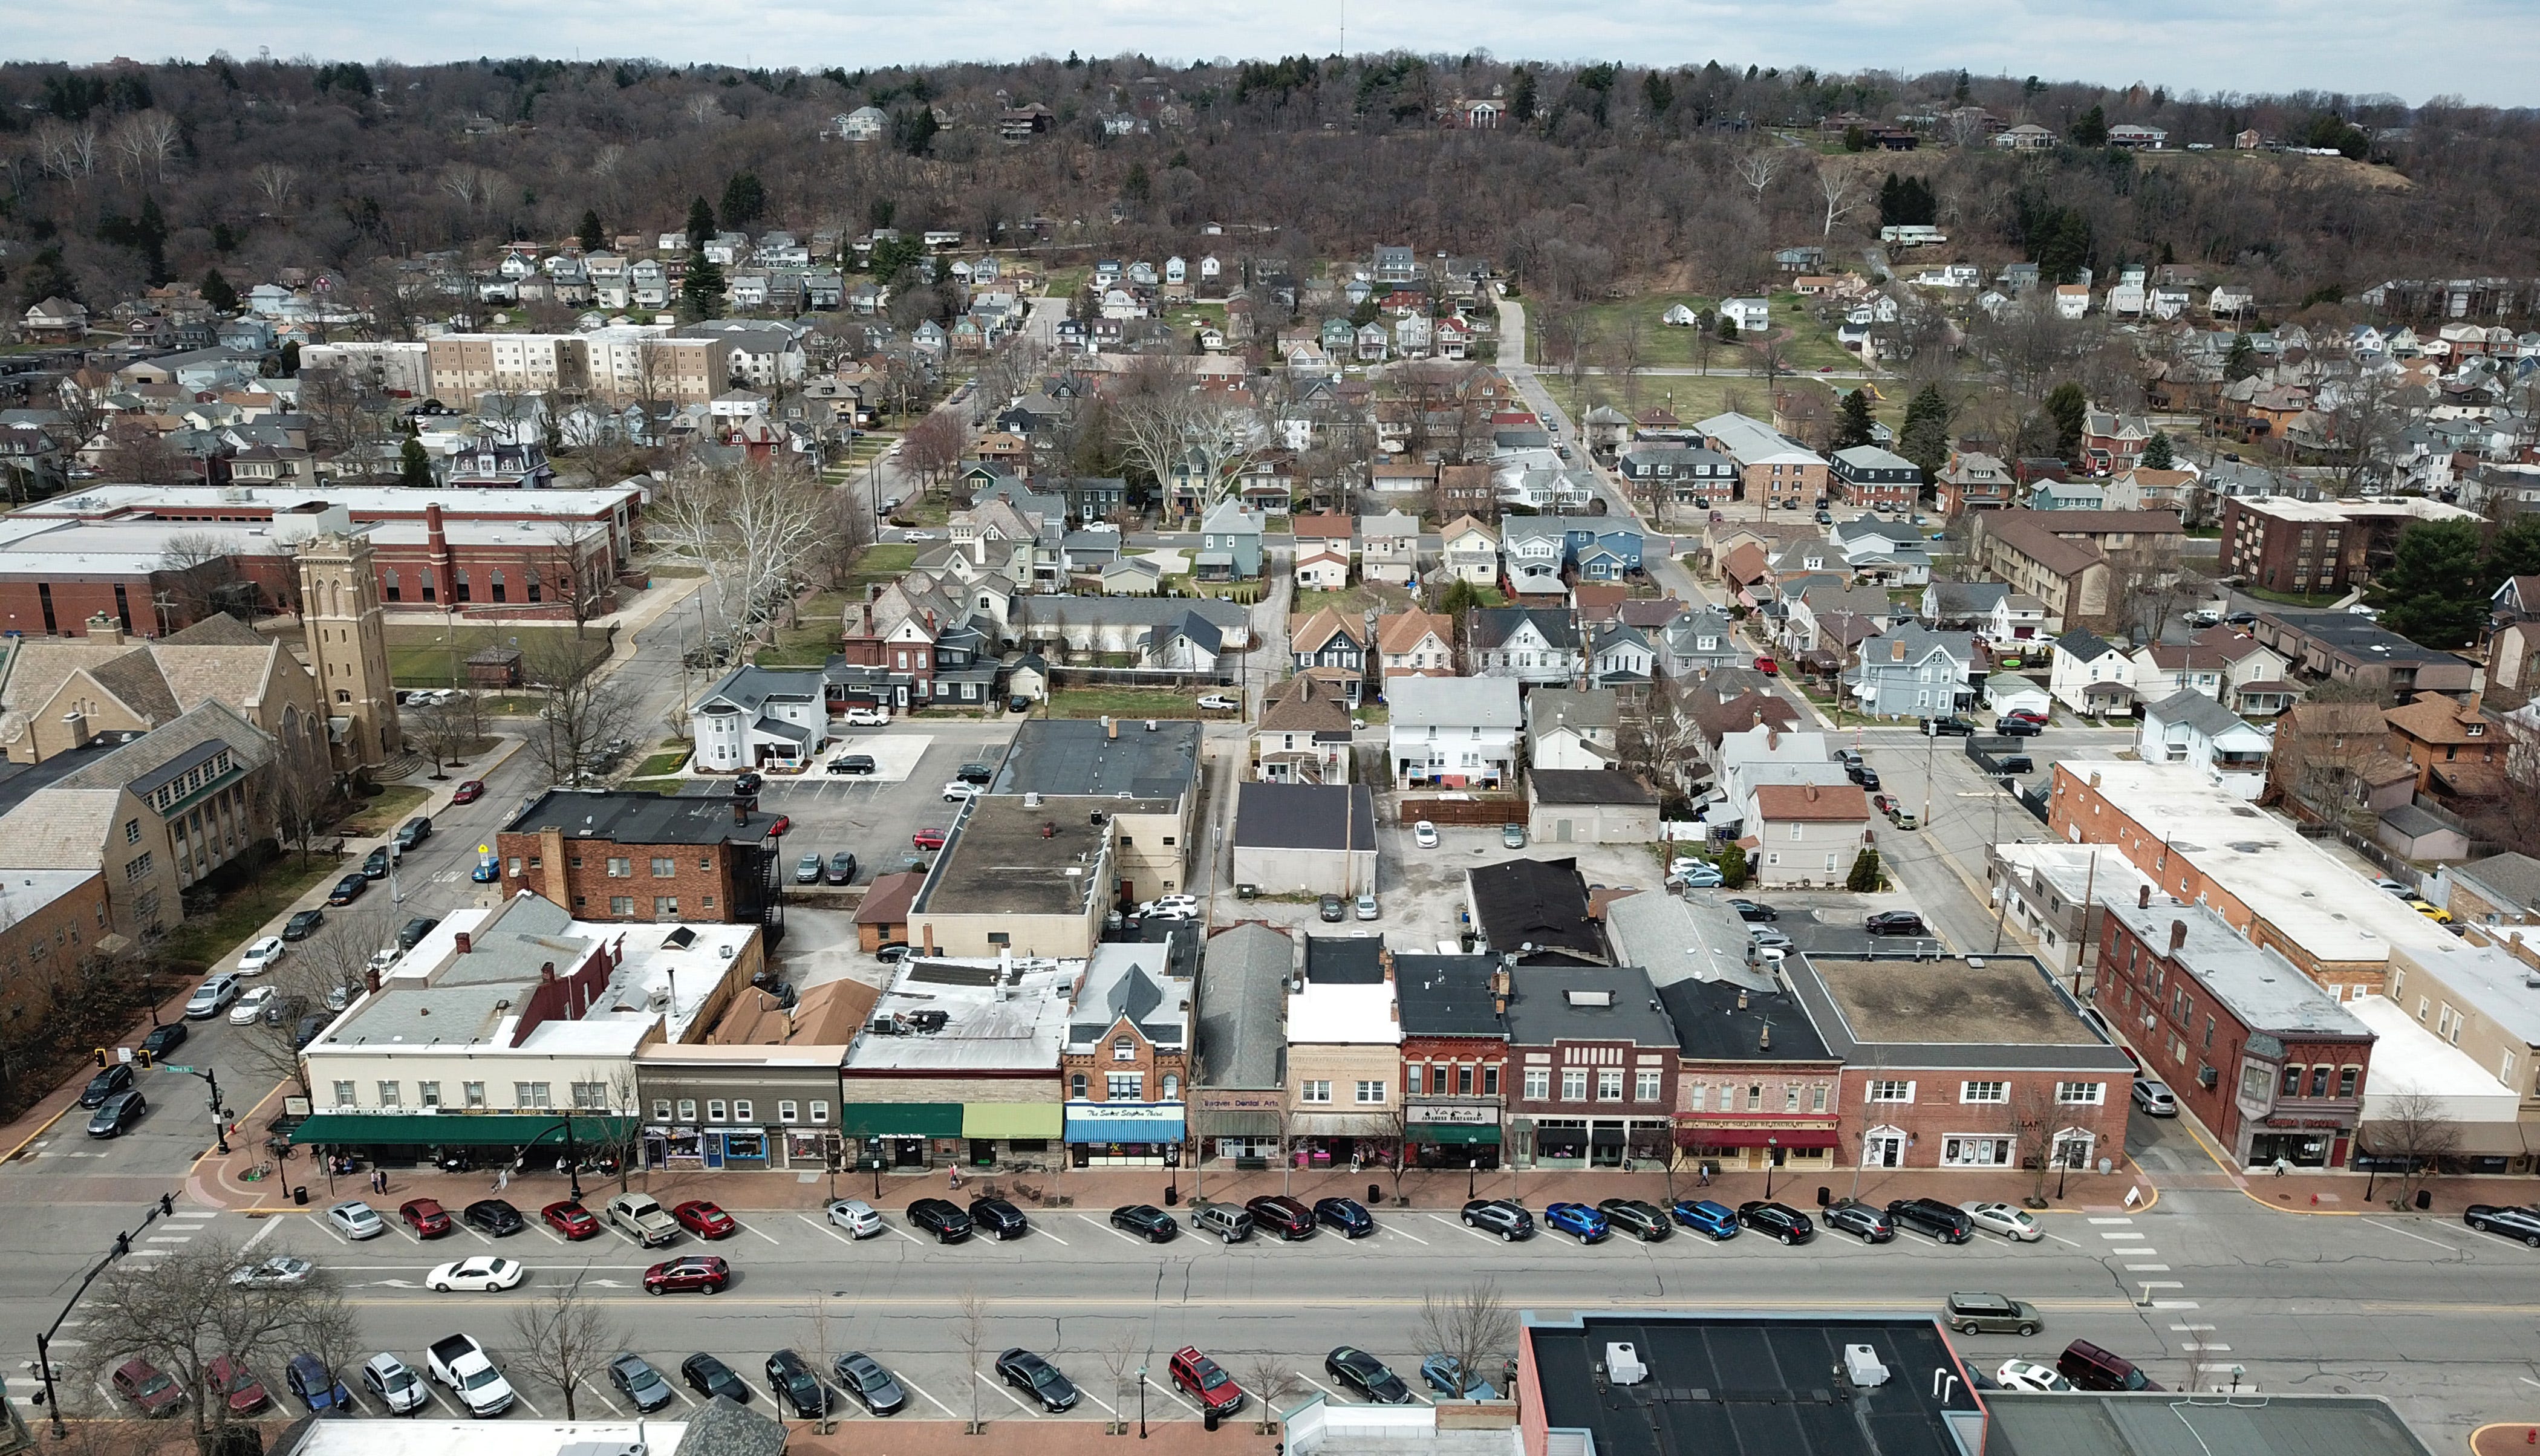 A view of Beaver, Pennsylvania. March 18, 2022.